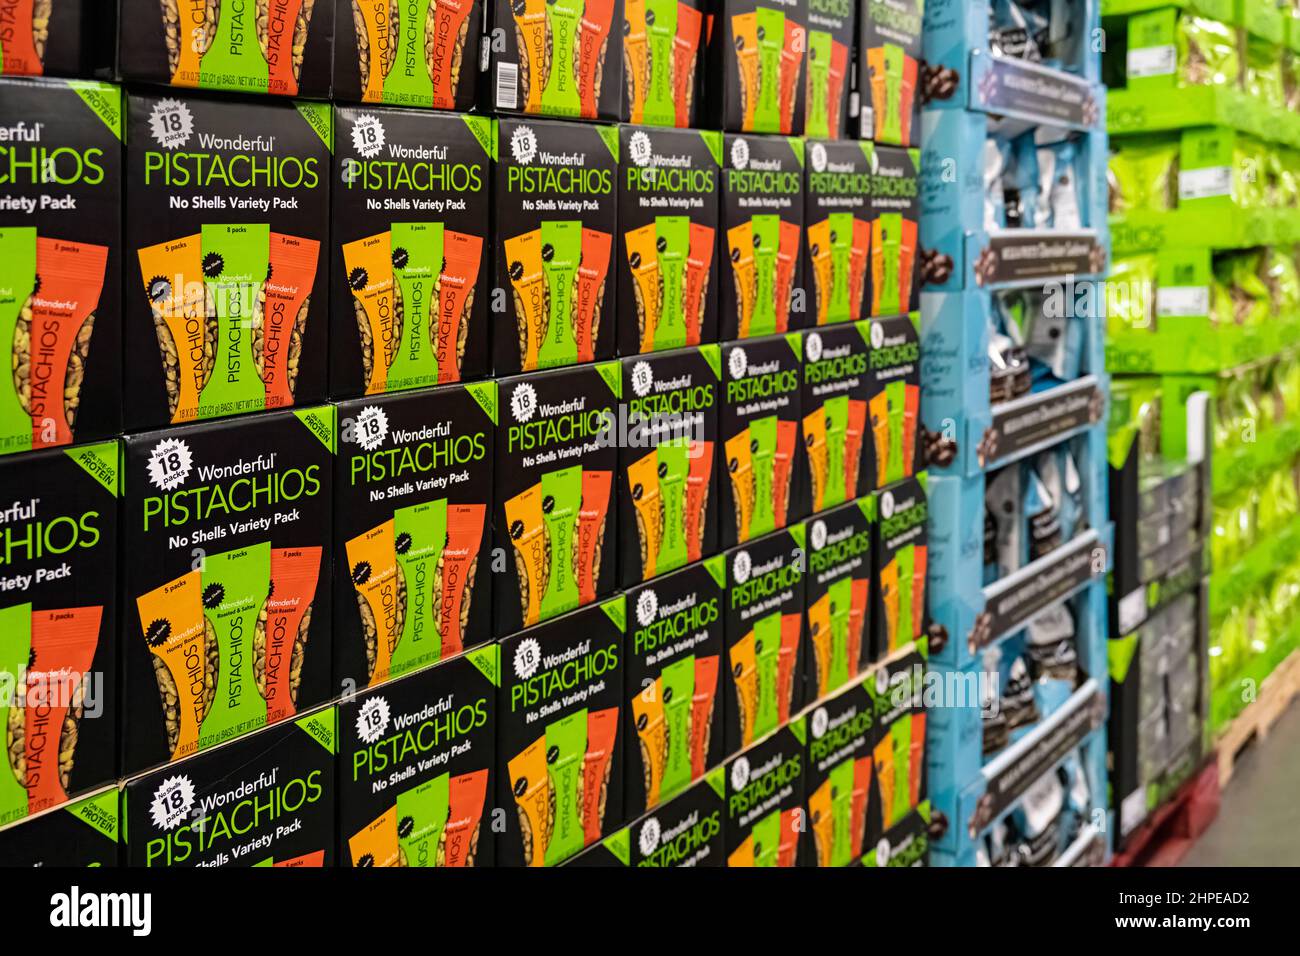 Boxes of shelled pistachios and other snacks at the Sam's Club warehouse store in Snellville, Georgia, just east of Atlanta. (USA) Stock Photo